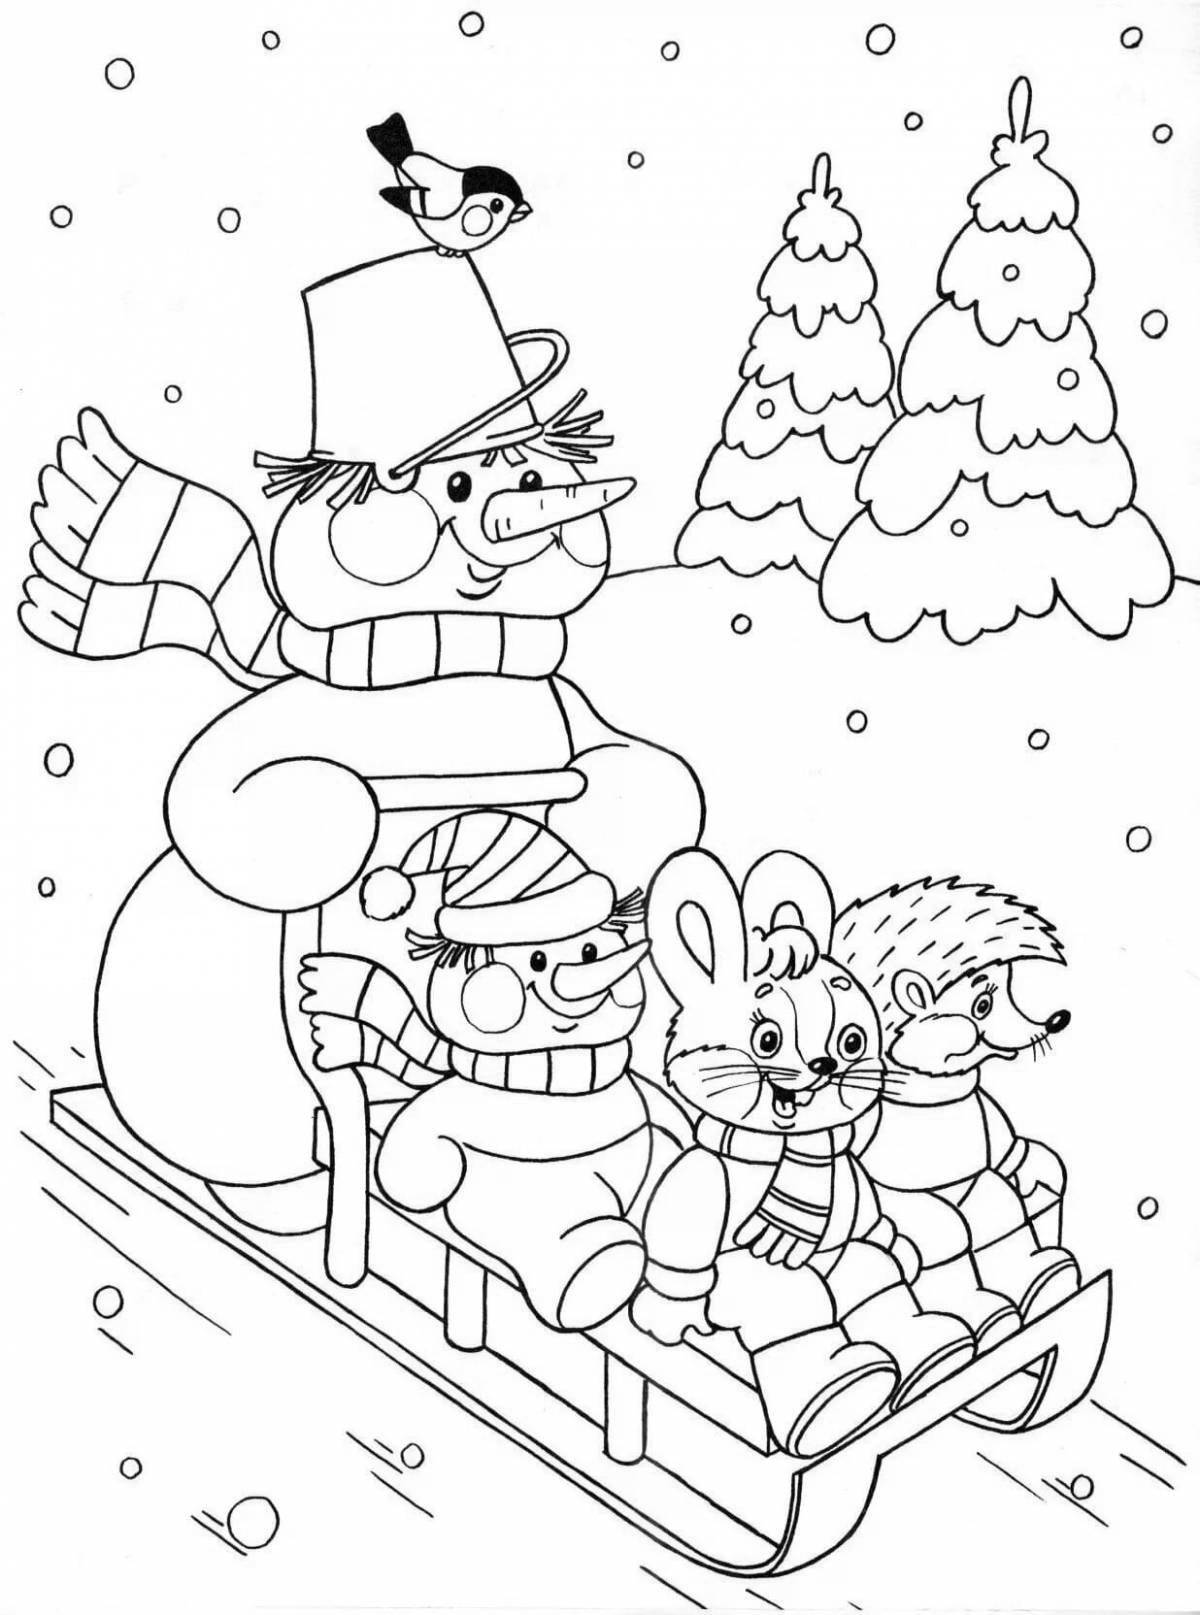 Exquisite winter coloring book for 8 year olds